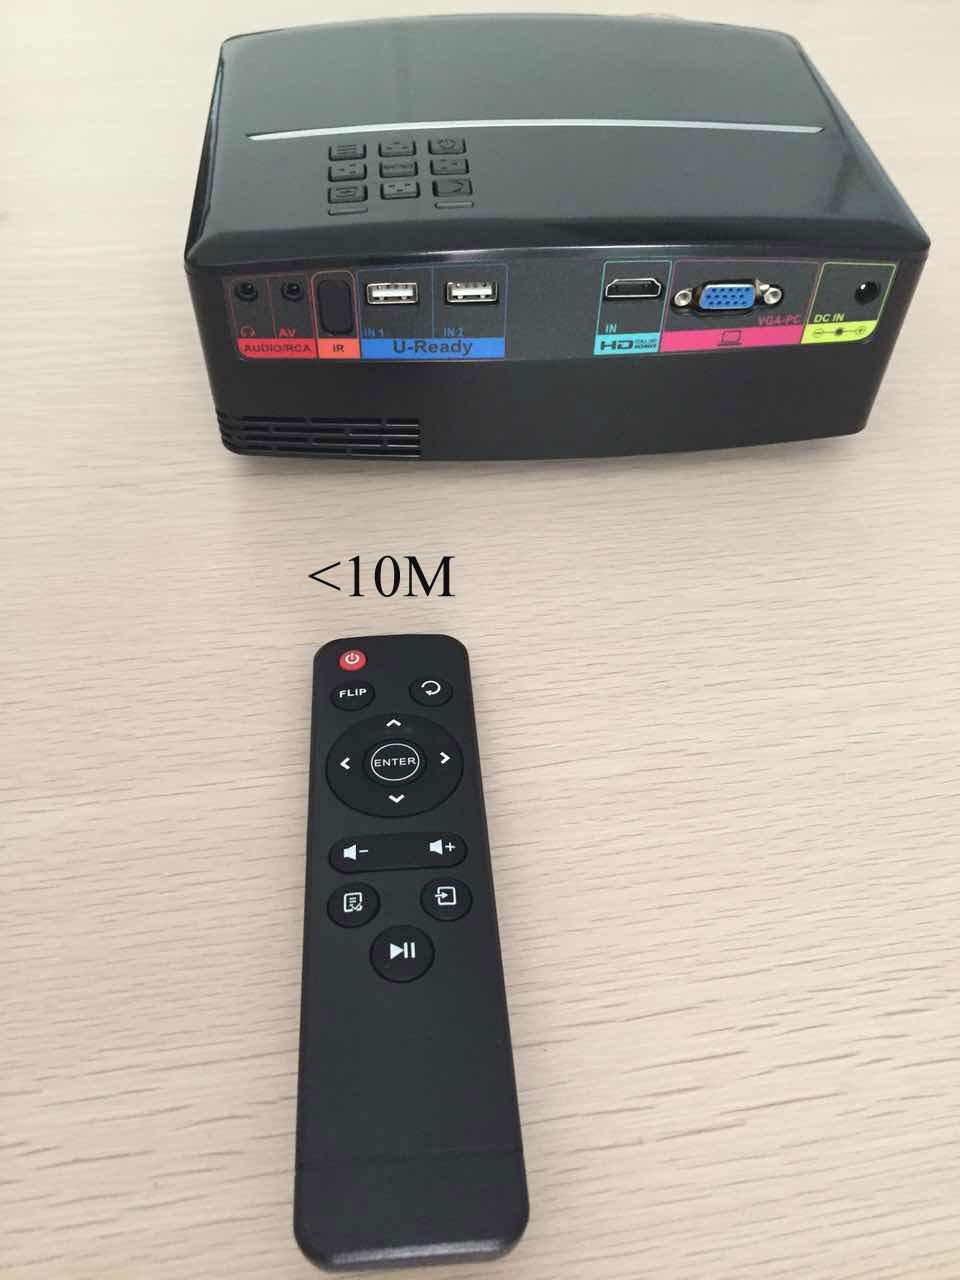 Range of Remote Control Signal Reception: The maximum effective remote control distance of the infrared remote control is 10M.